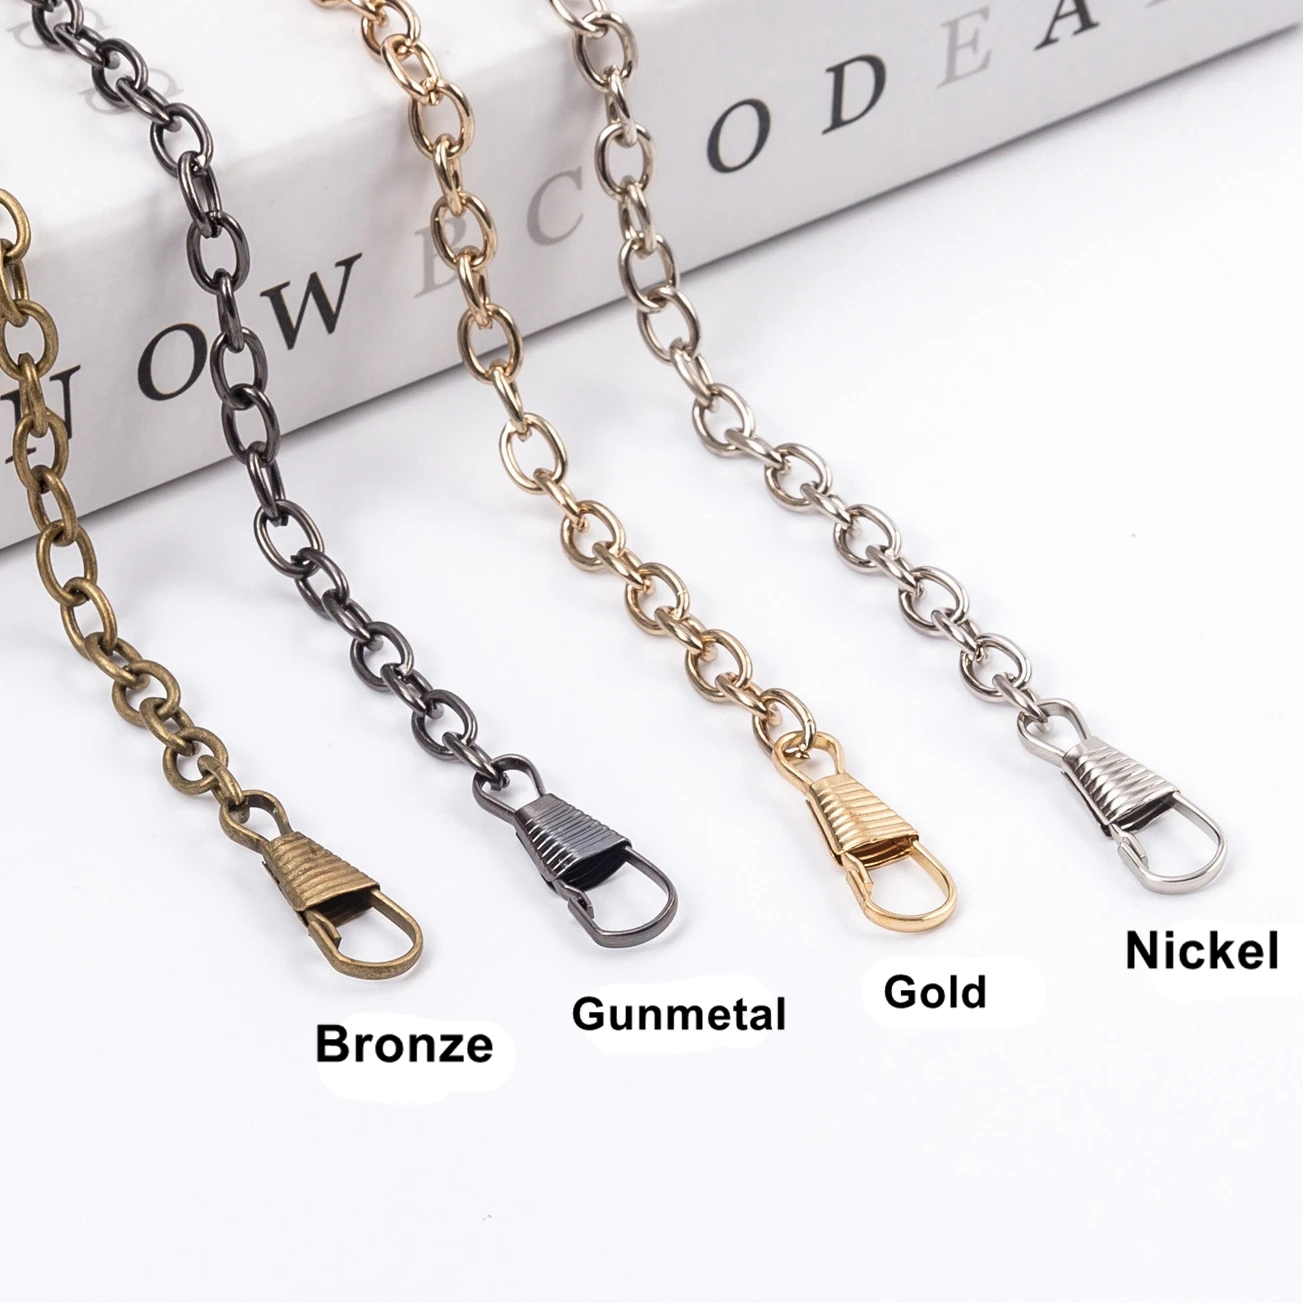 

Wholesale Decorative Accessories Metal Bag Chain Purse Chain With Hook, Light gold/nickel/gunmetal/antique brass